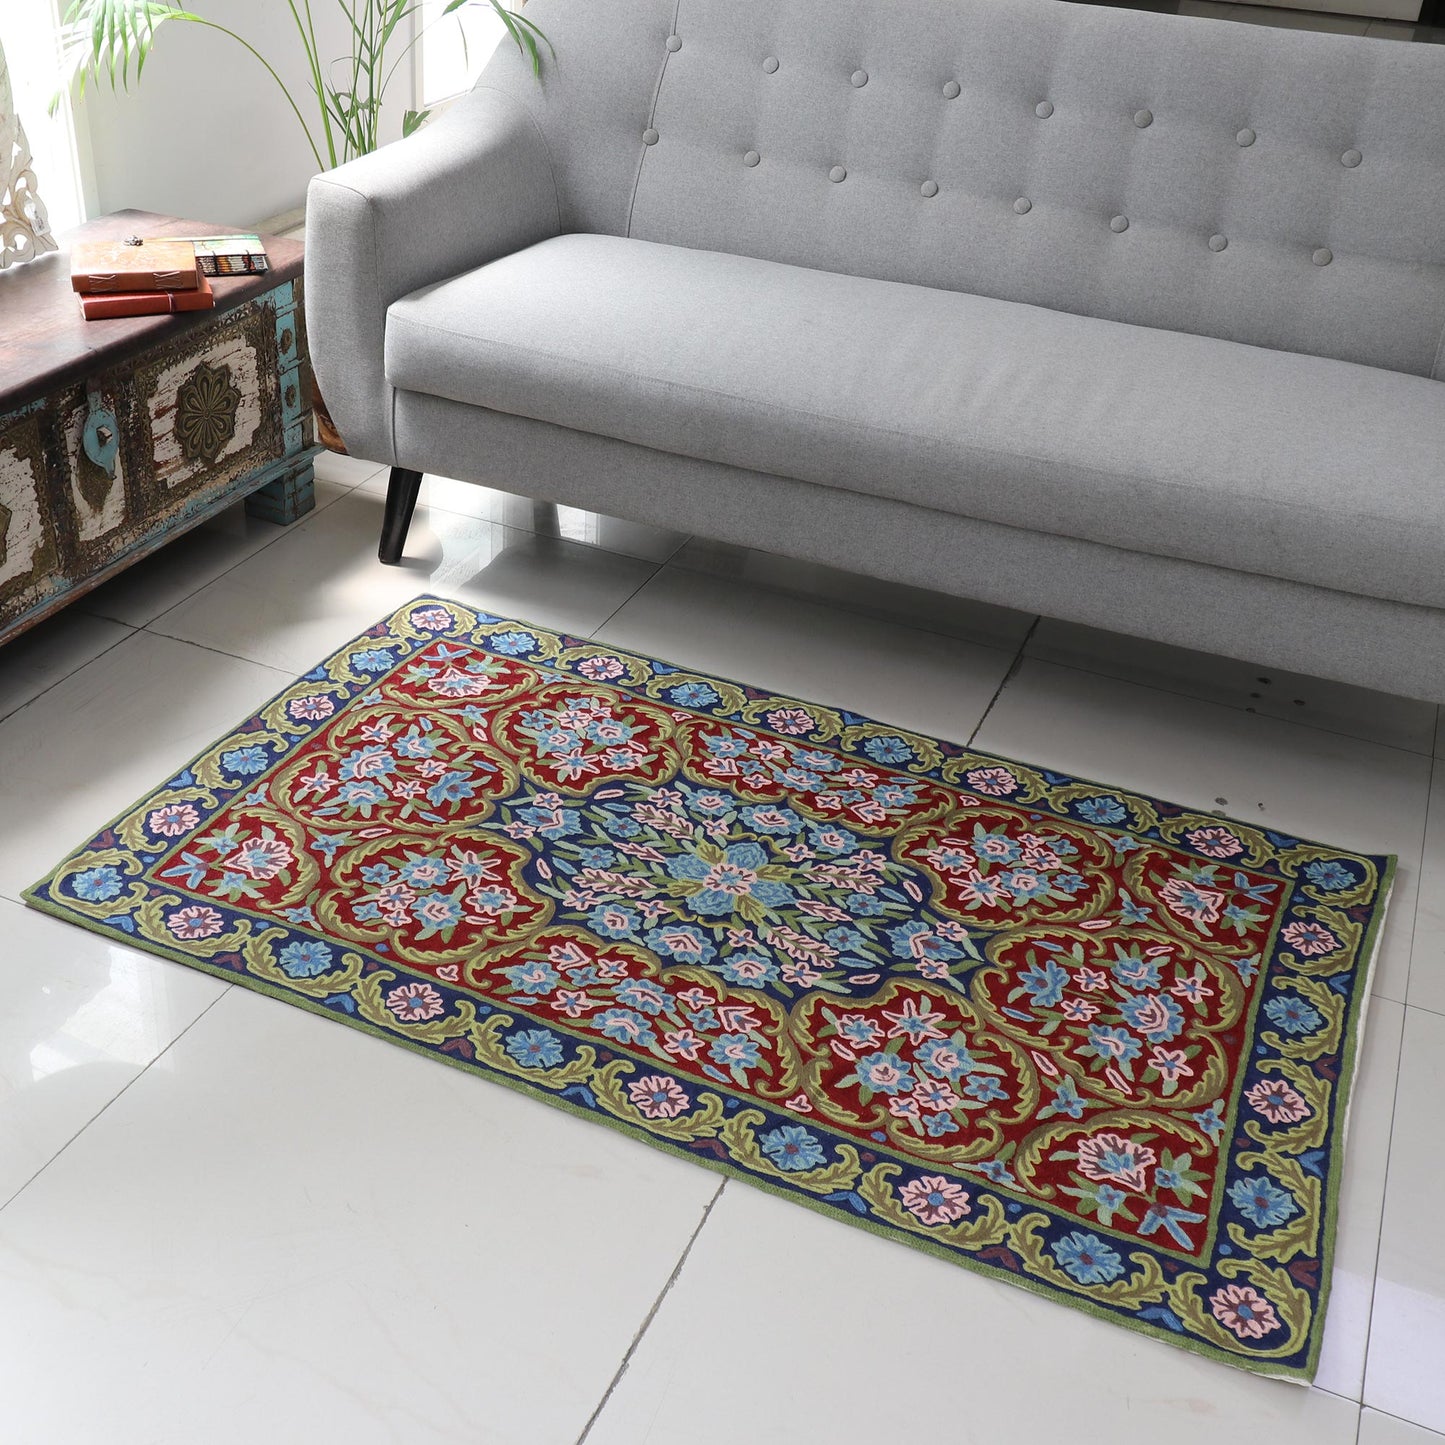 Kashmir Festival Handcrafted Floral Geometric 3 by 5 Ft Chain Stitch Rug